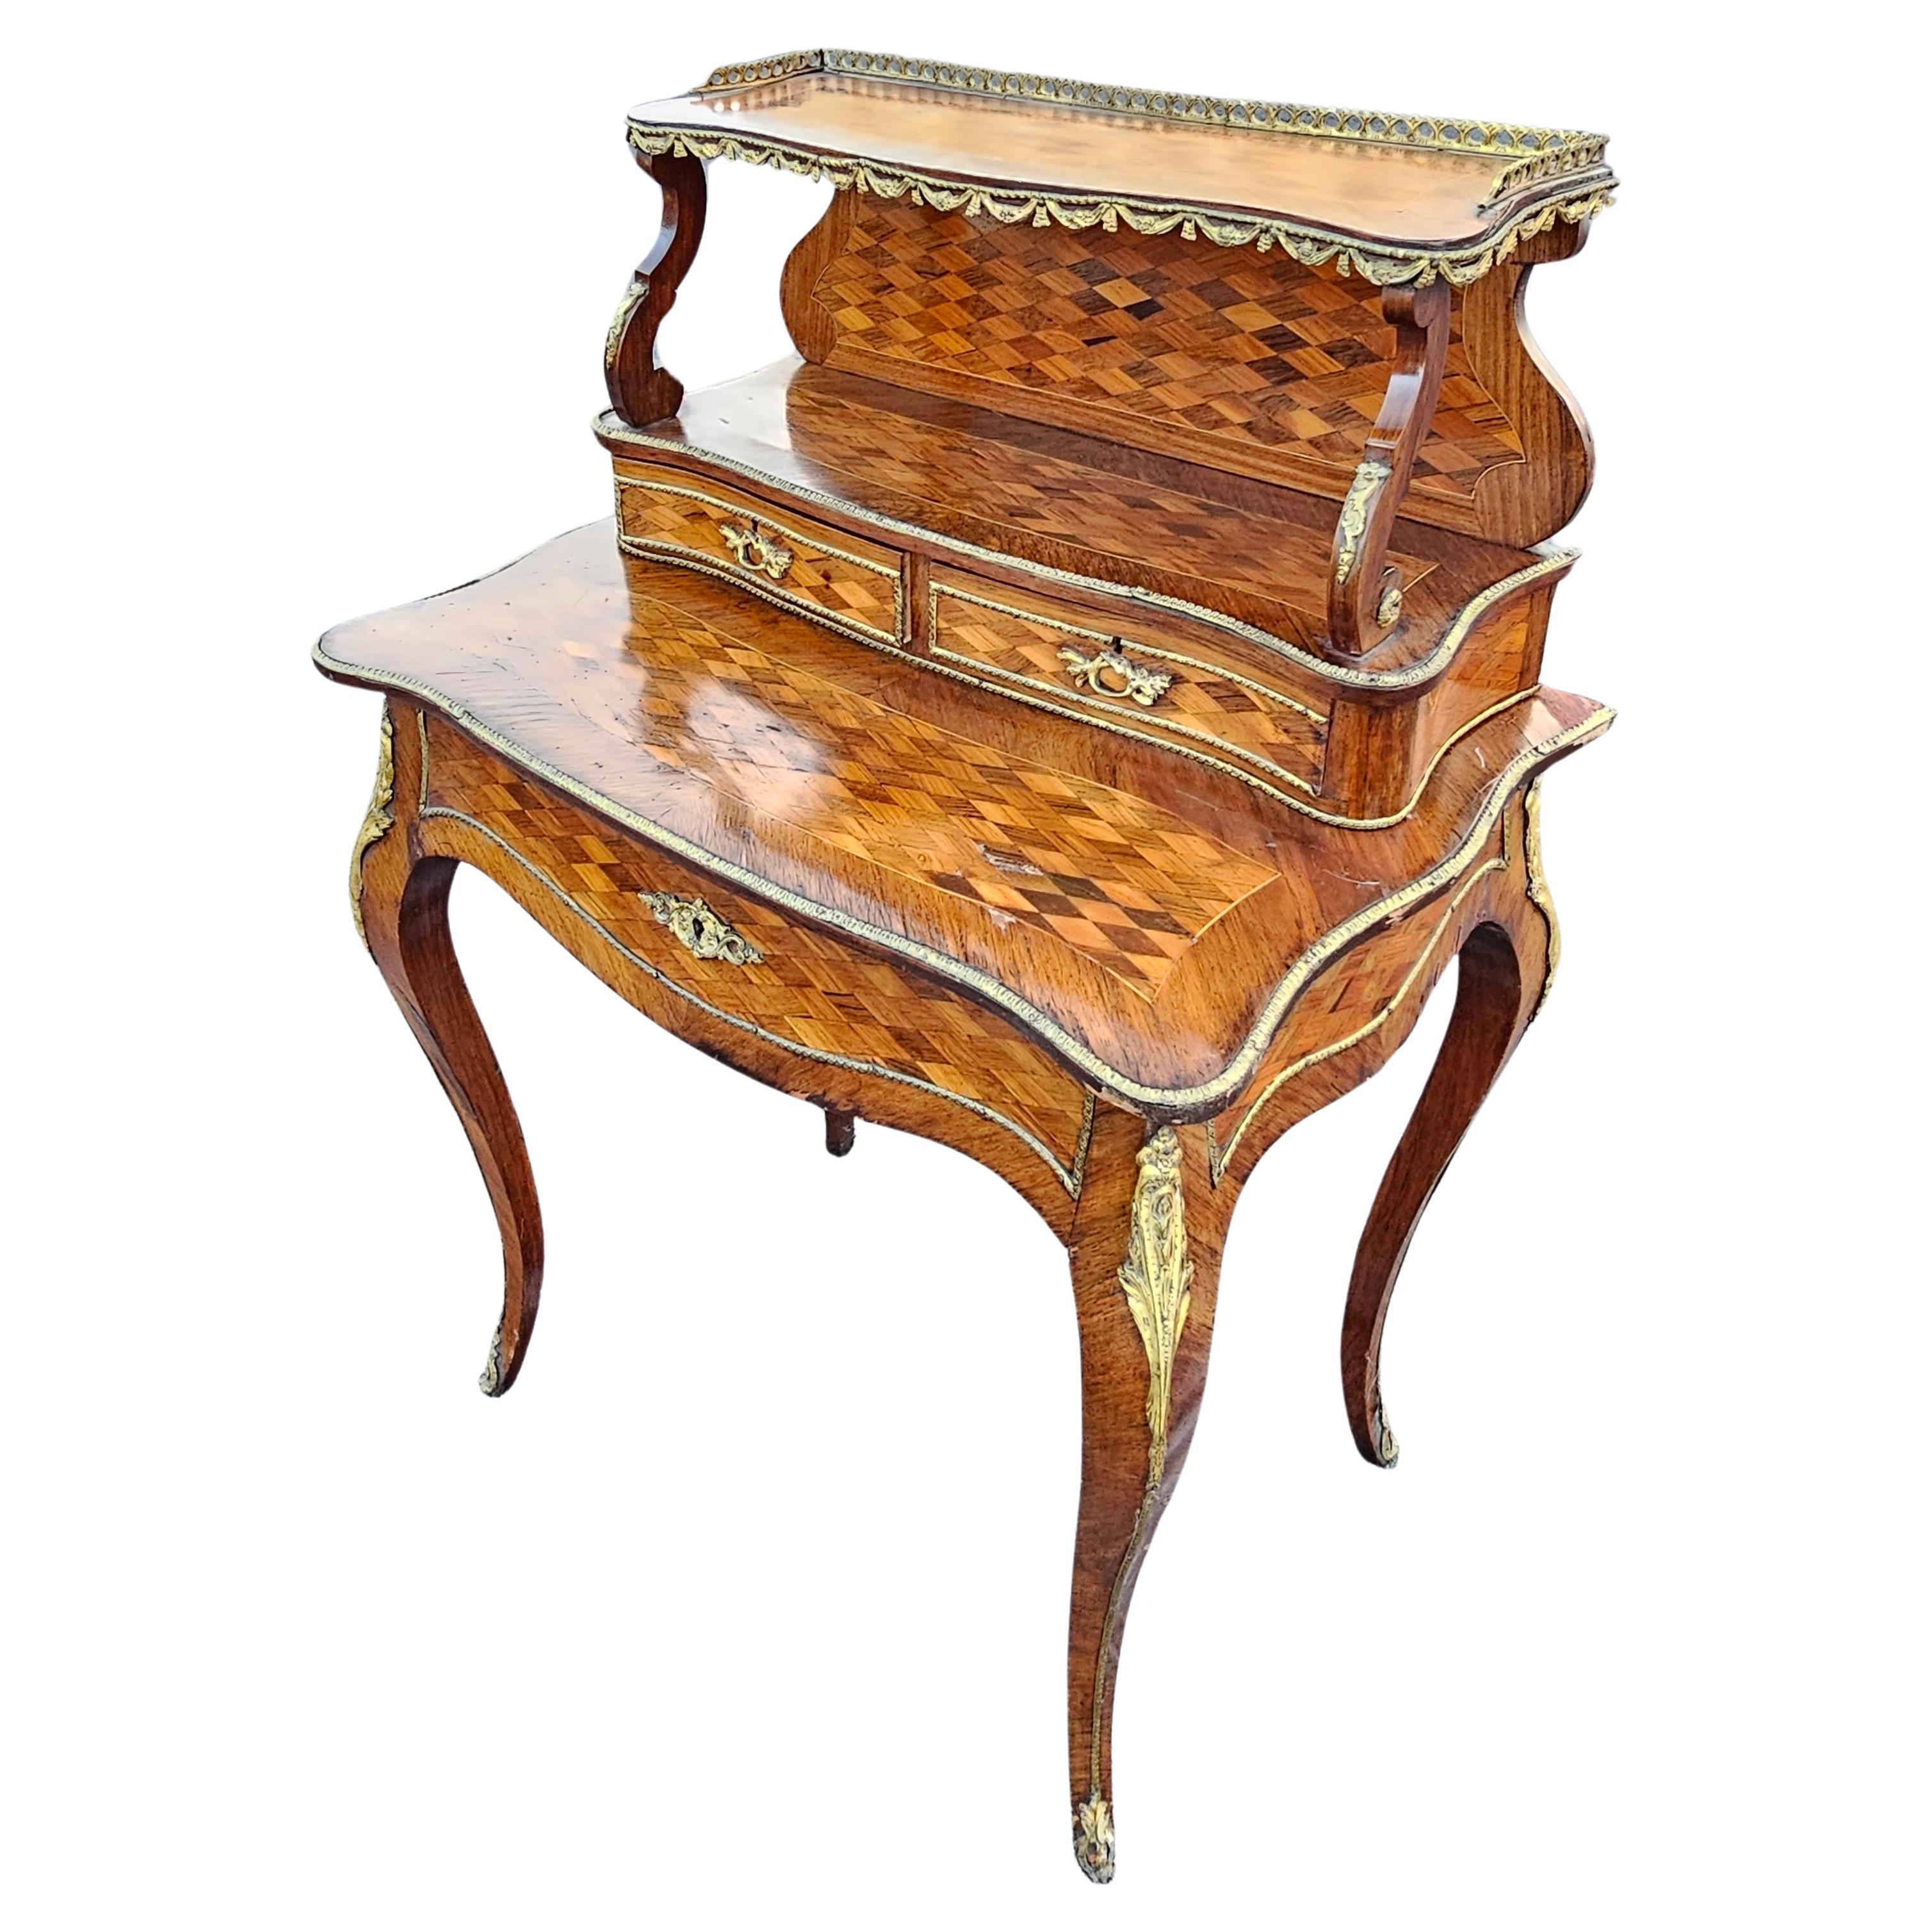 A 19th Century French Louis XV Style kingwood and Walnut marquetry, ormolu mounted and galleried bonheur du jour, the top marquetry and galleried details. Two upper smaller drawers measuring 10